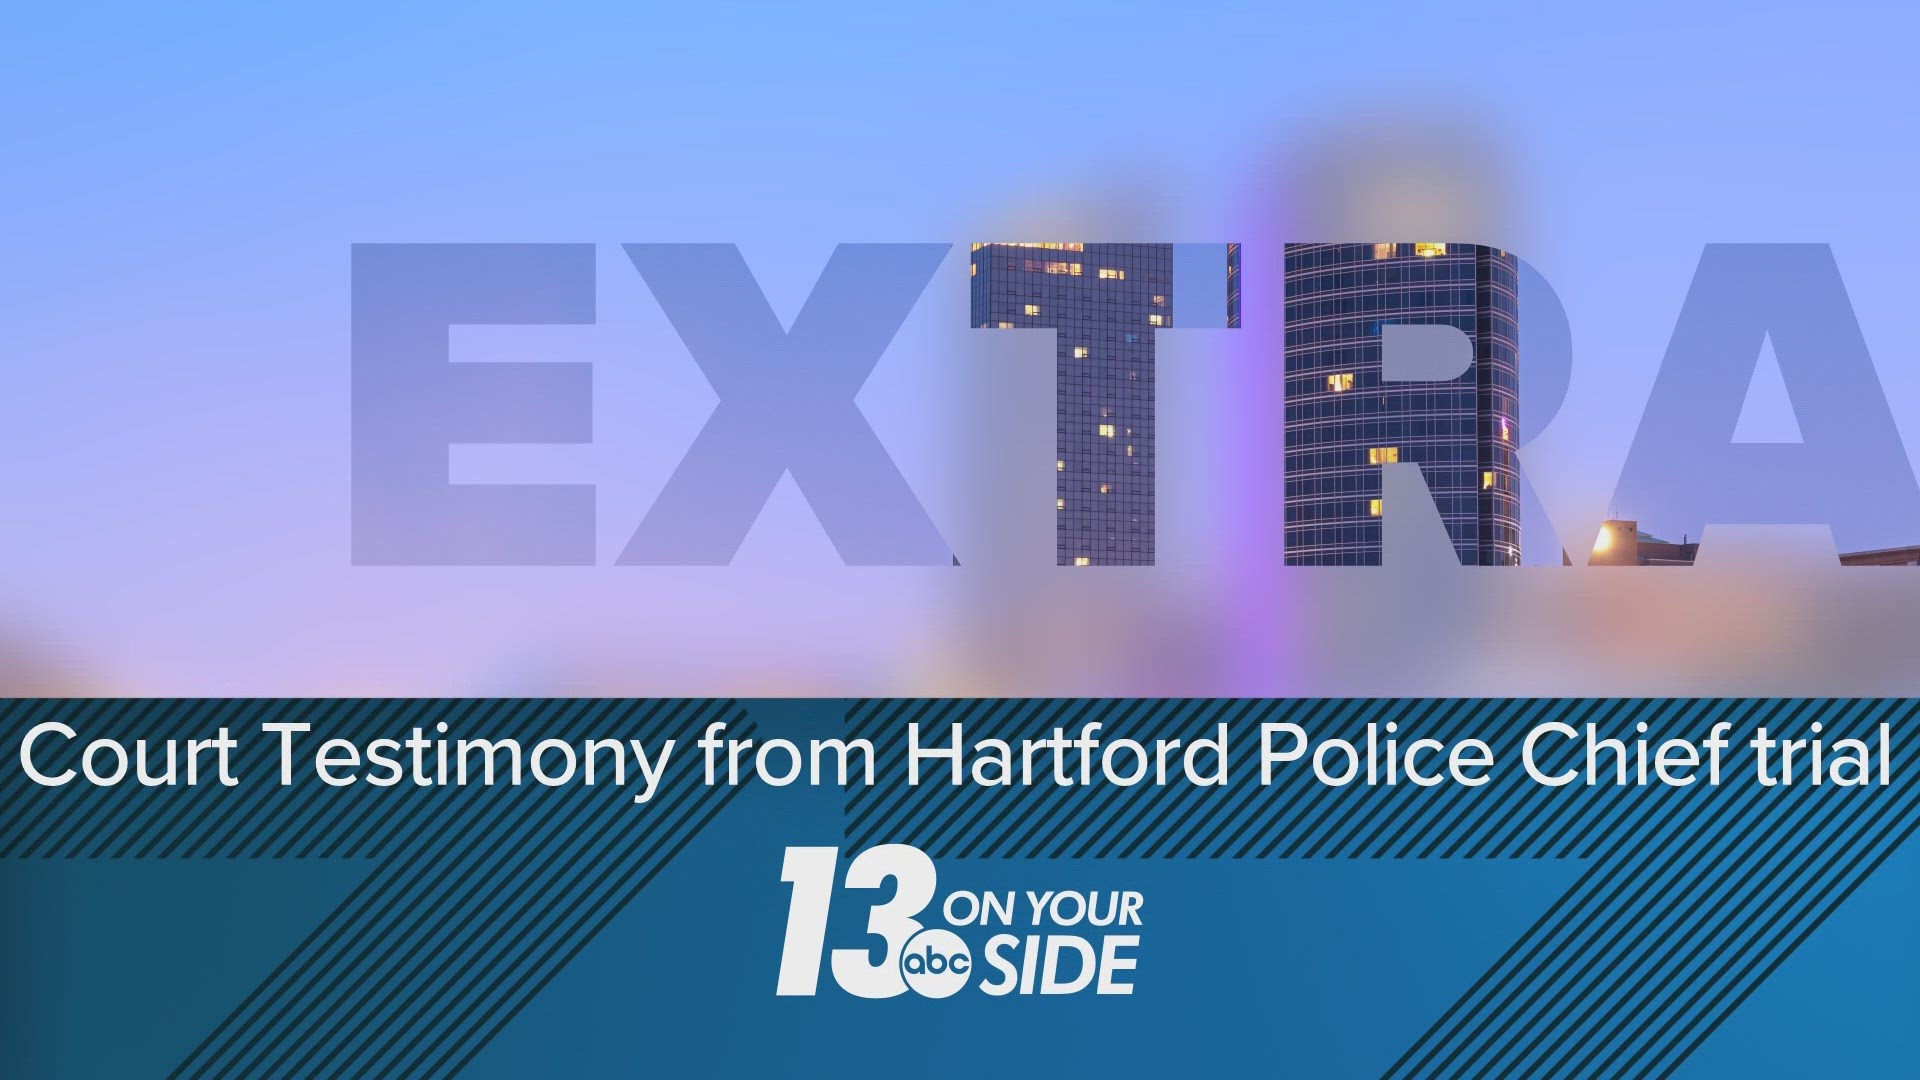 The former Hartford police chief is charged with multiple felonies after allegedly admitting to stealing from a drug disposal box at the station.